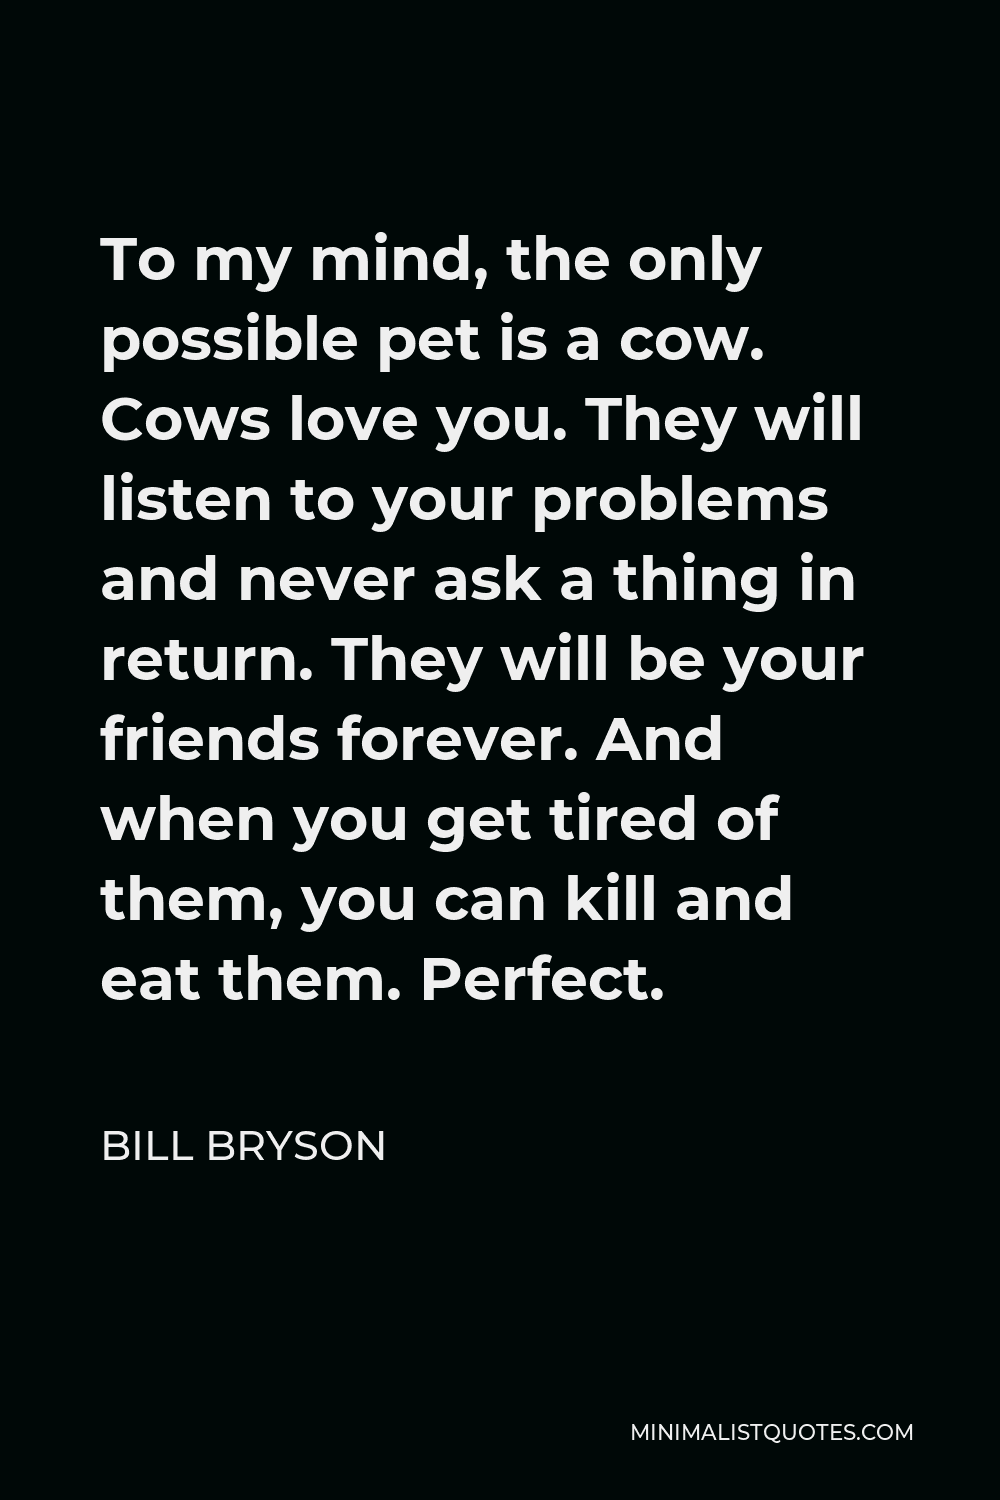 Bill Bryson Quote - To my mind, the only possible pet is a cow. Cows love you. They will listen to your problems and never ask a thing in return. They will be your friends forever. And when you get tired of them, you can kill and eat them. Perfect.